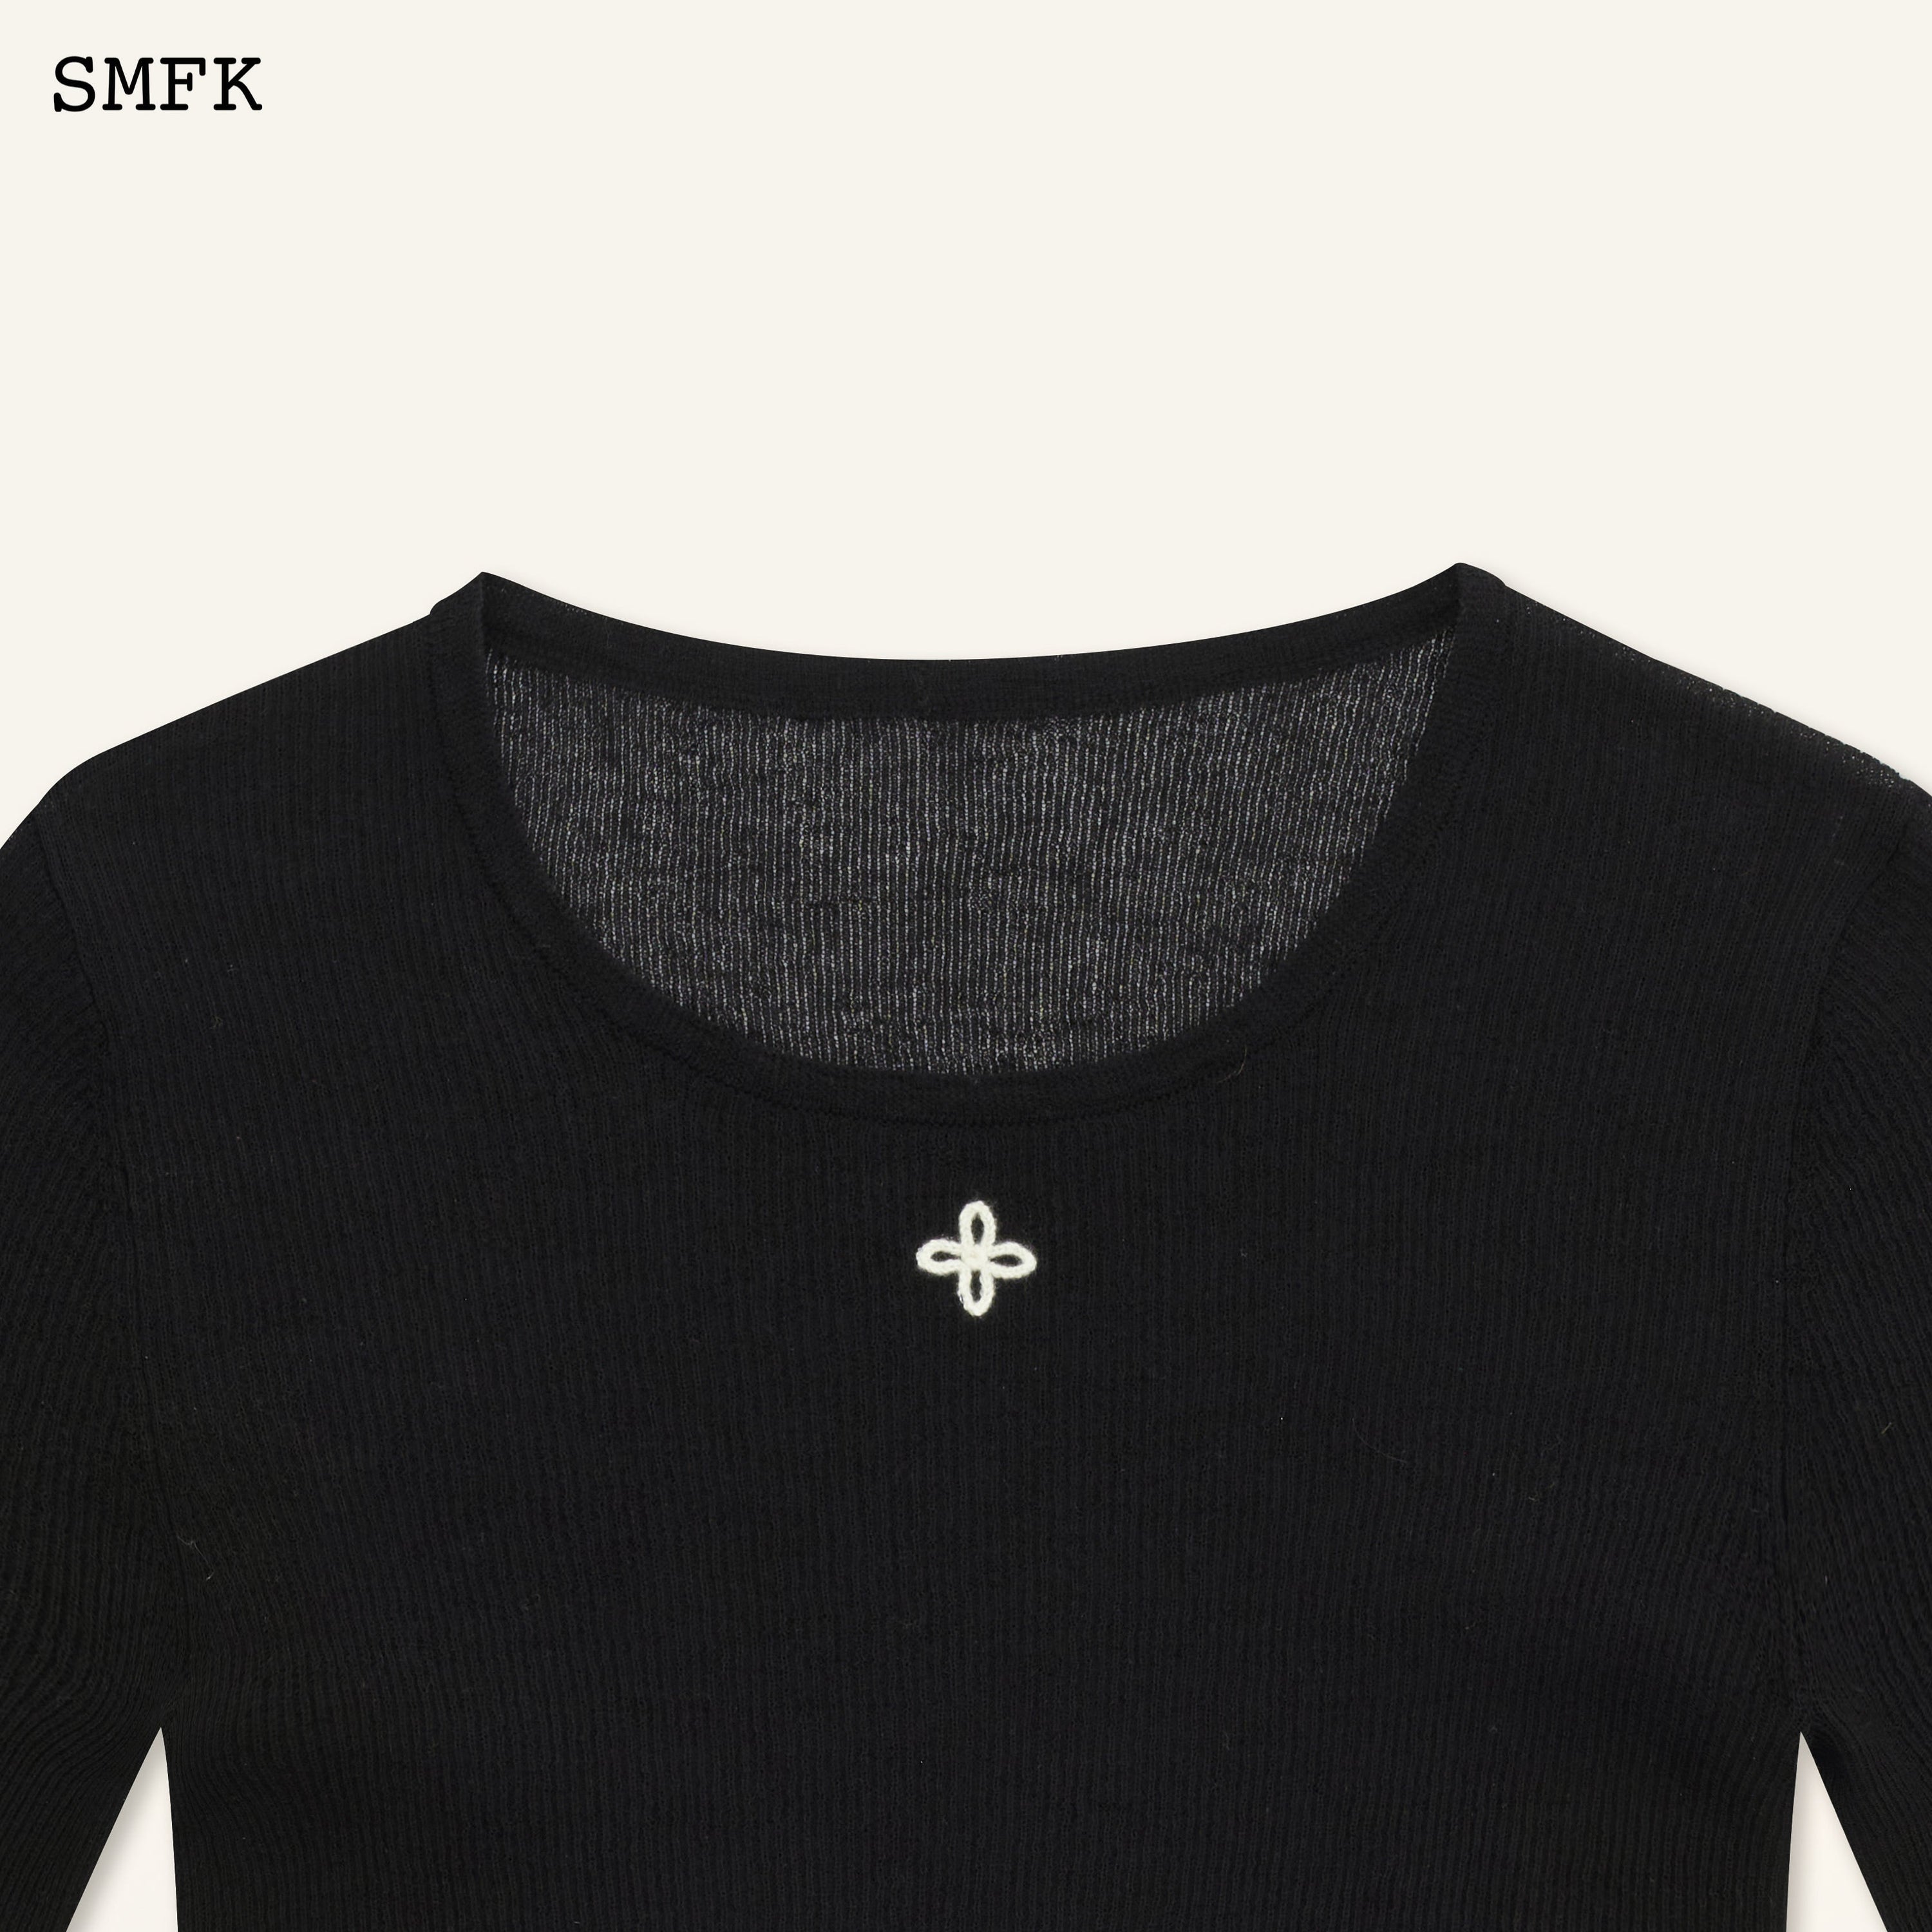 Compass Cross Classic Black Knitted Sweater - SMFK Official